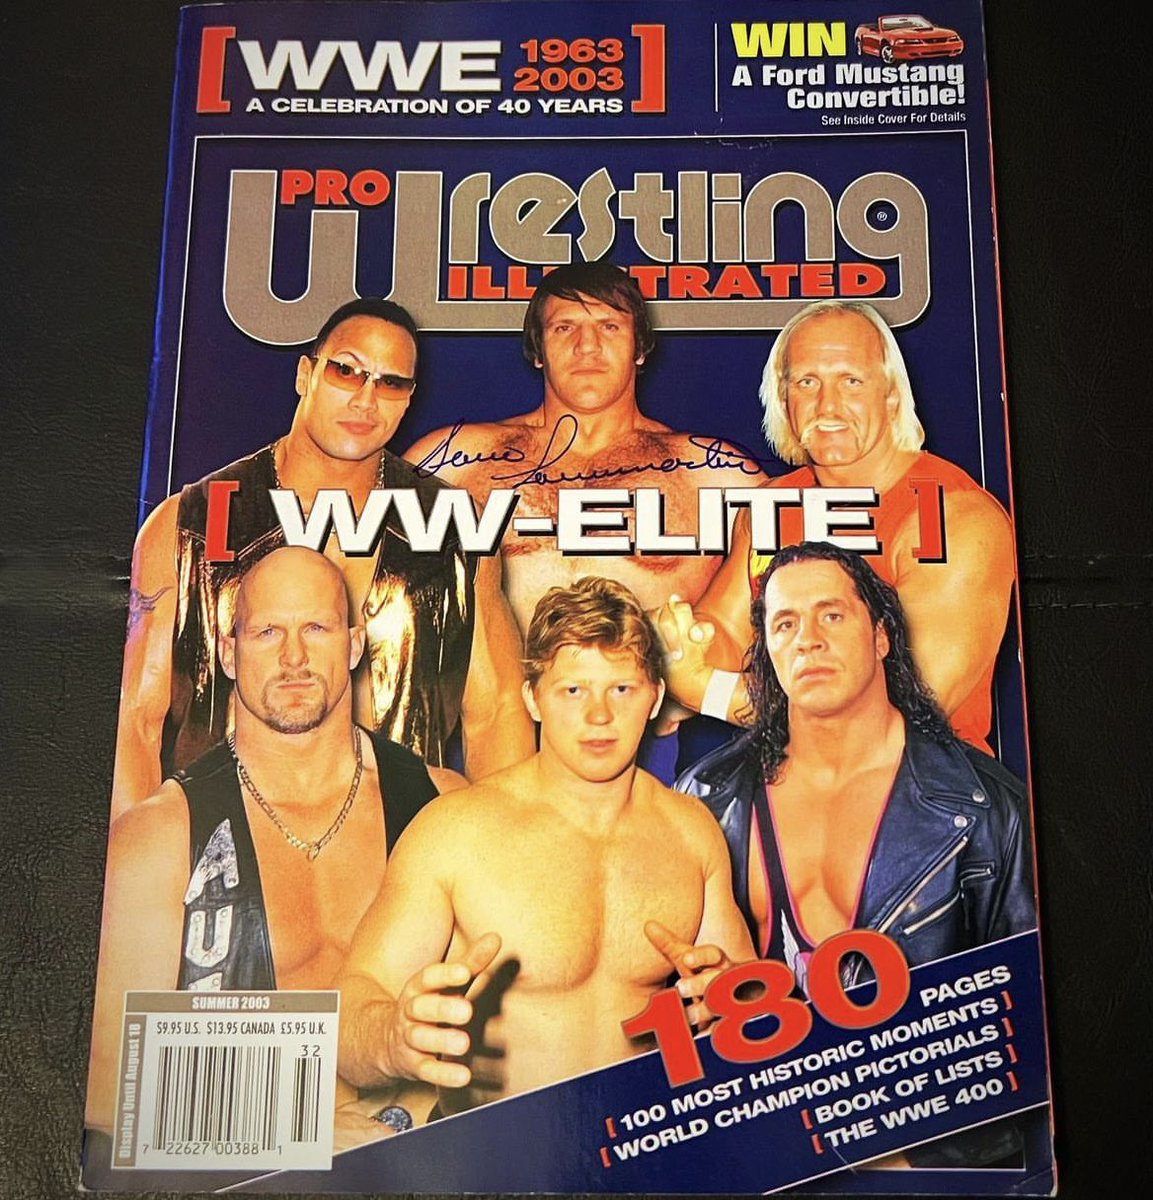 With all the hubbub over retros it was easy to overlook the previous blog entry released just a few days earlier. Don’t sleep on Bruno. Ever.

#BrunoSammartino
#TheLivingLegend
#WrestlingAutographs
#PittsburghWrestling
#WWEHistory
#PWI

wrestlingmemorabilia.blogspot.com/2023/01/signat…